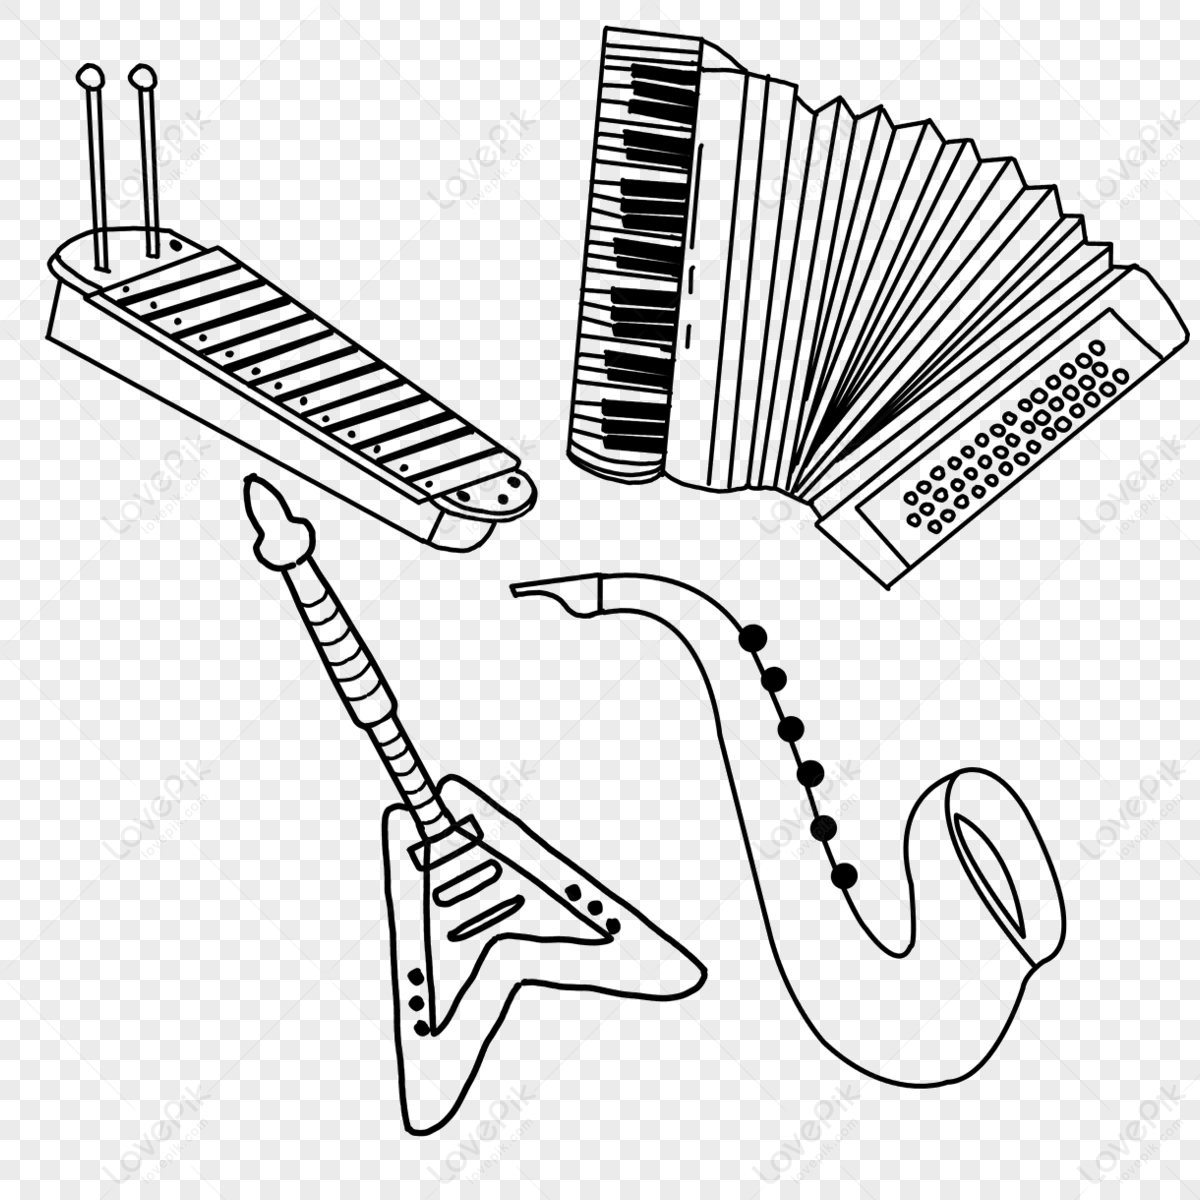 Musical Instruments Sketches for Arts Design Stock Vector - Illustration of  isolated, equipment: 71106588